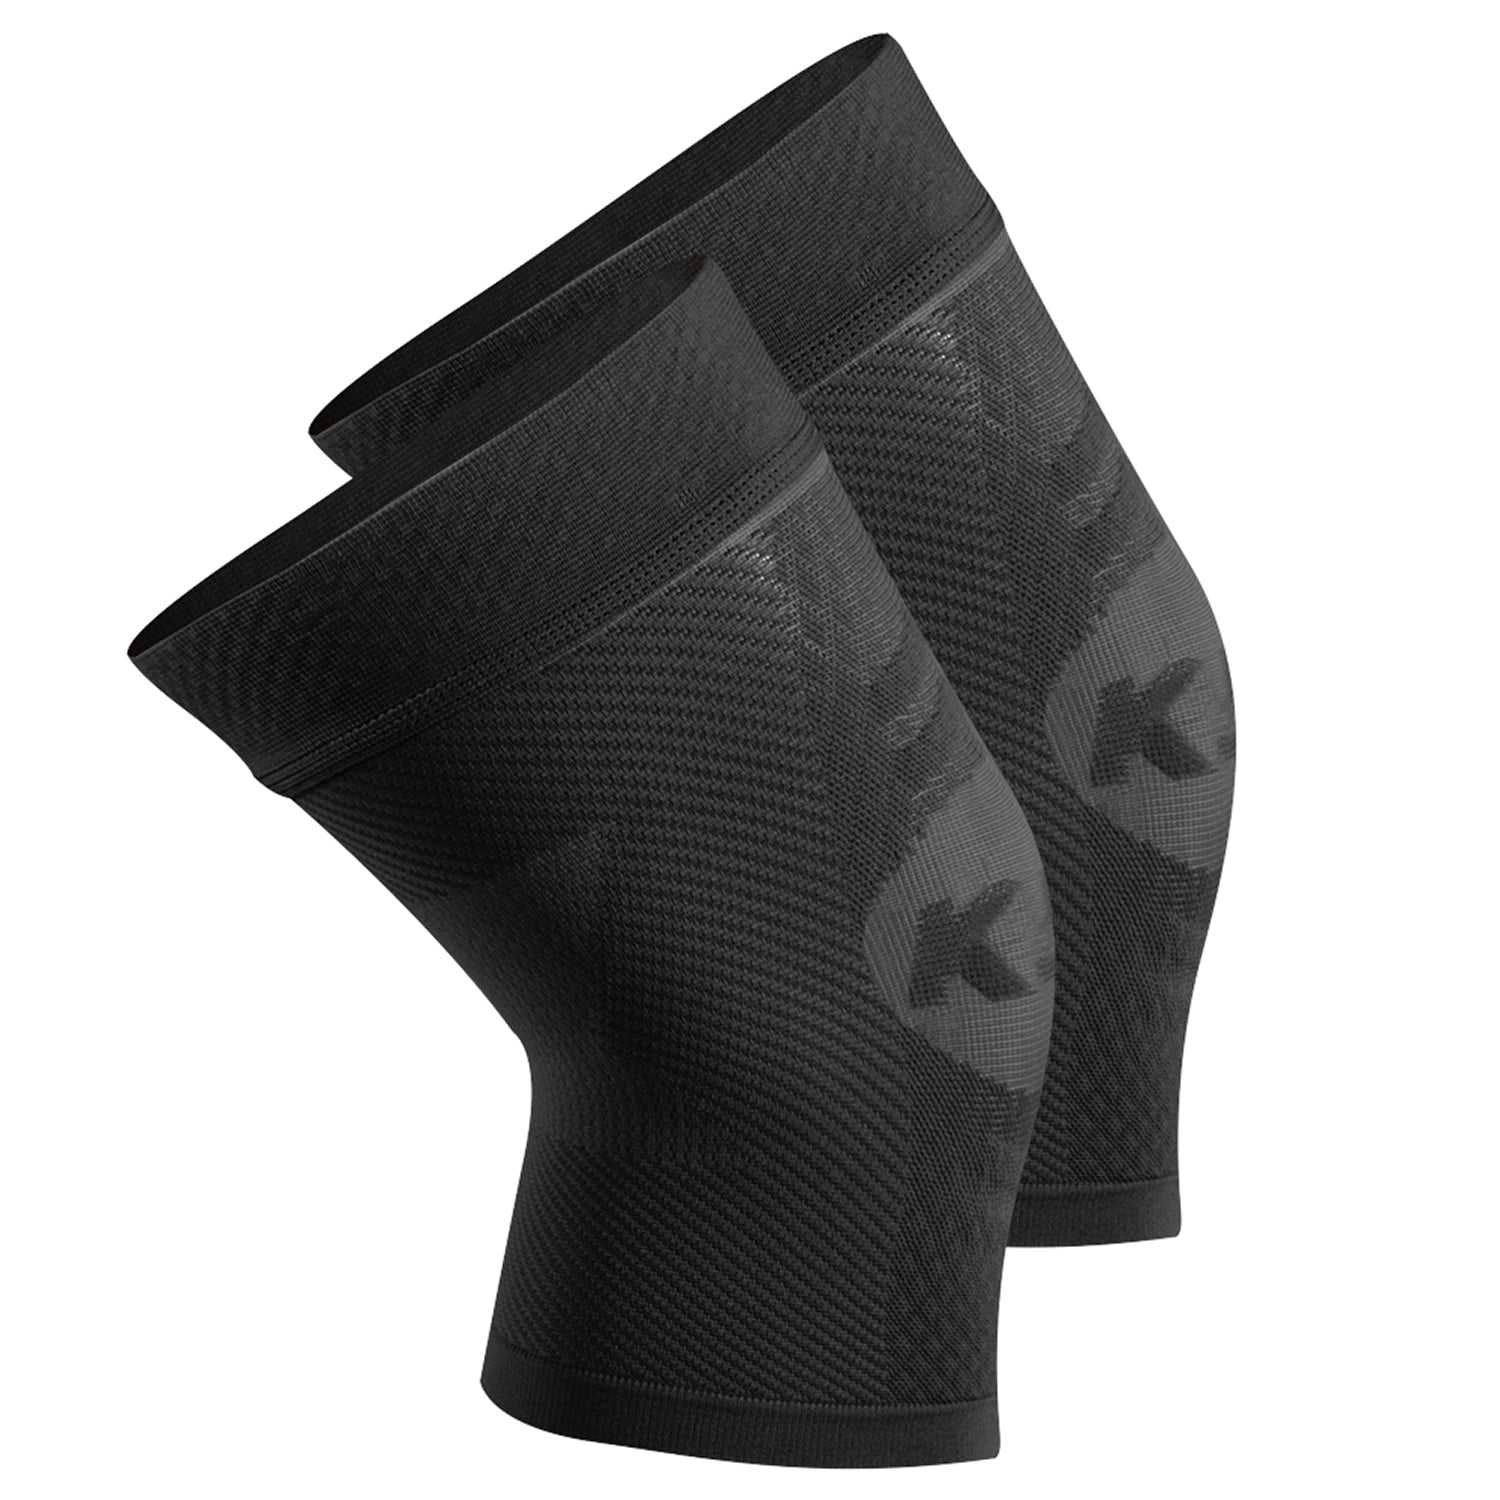 KS7 Knee compression sleeve, Orthosleeve guard, perfect knee support from  physio